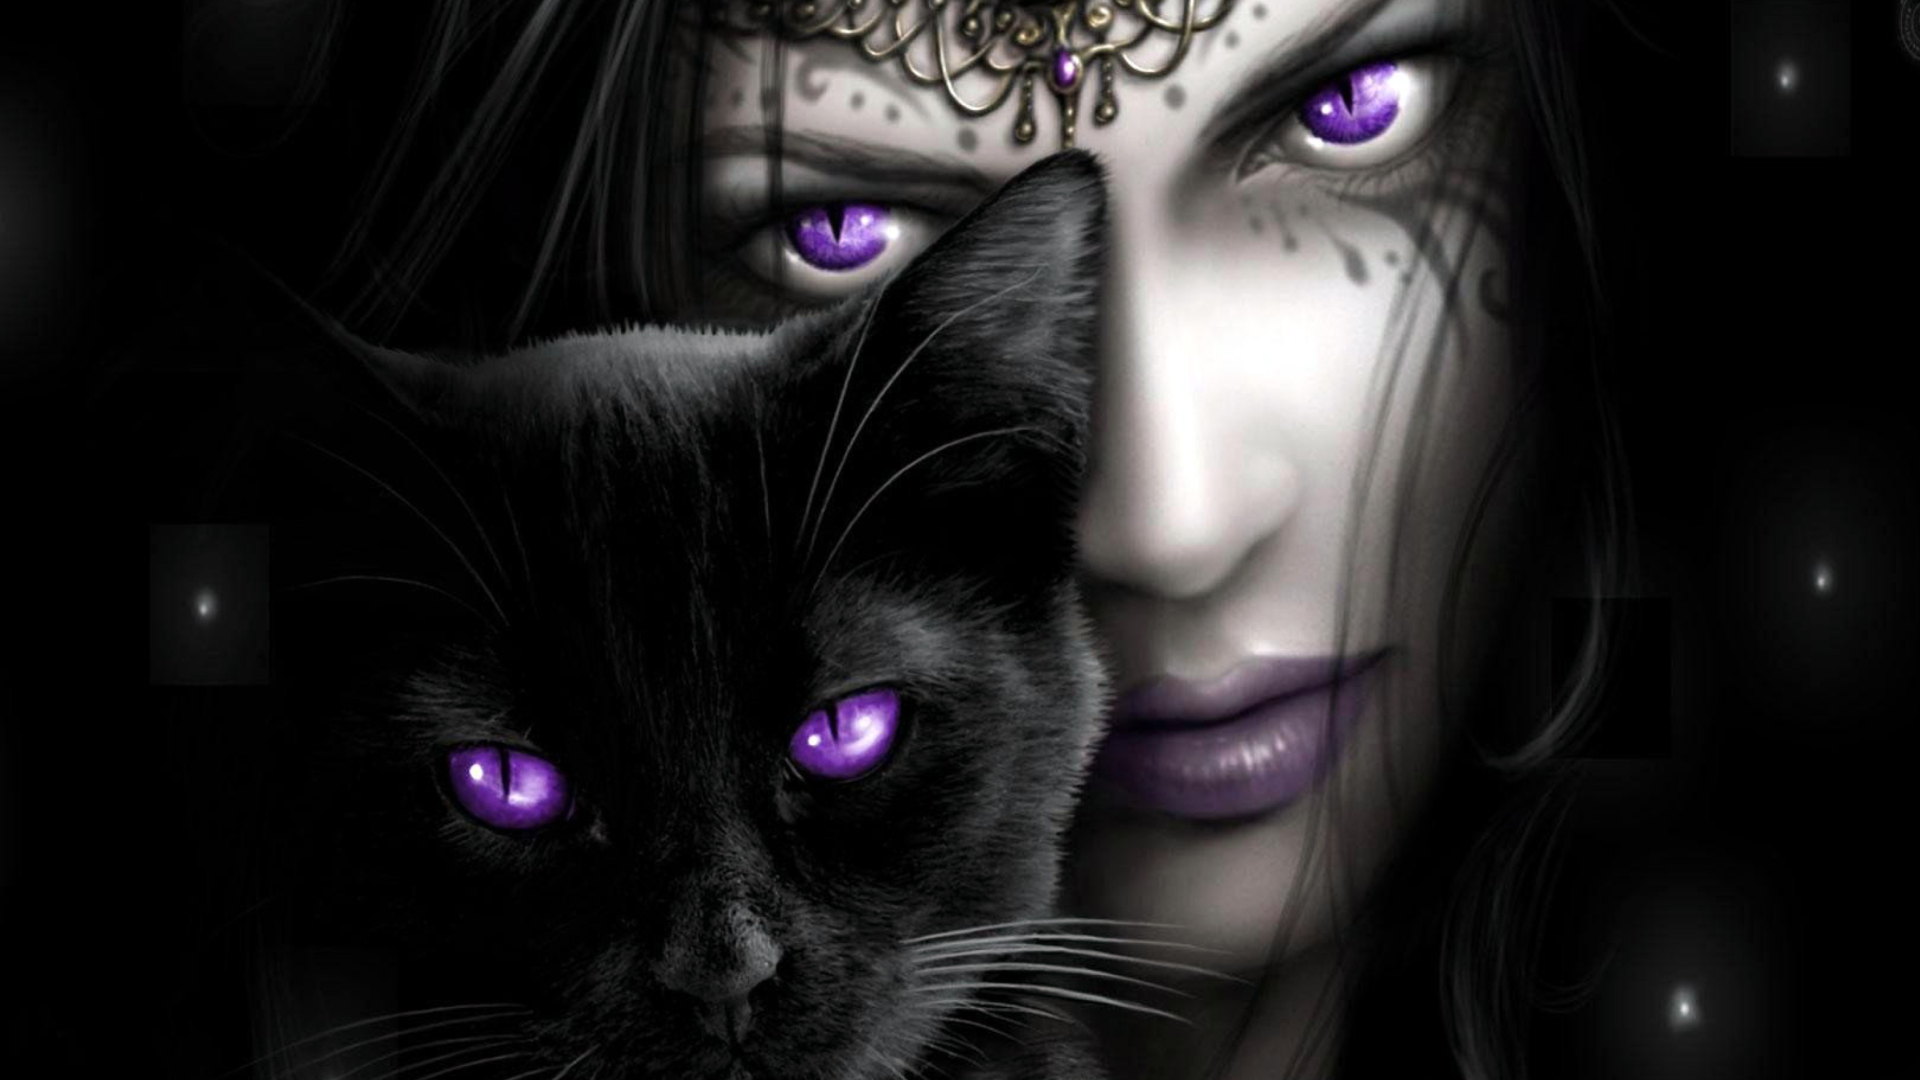 Witch With Black Cat Wallpaper for Desktop 1920x1080 Full HD